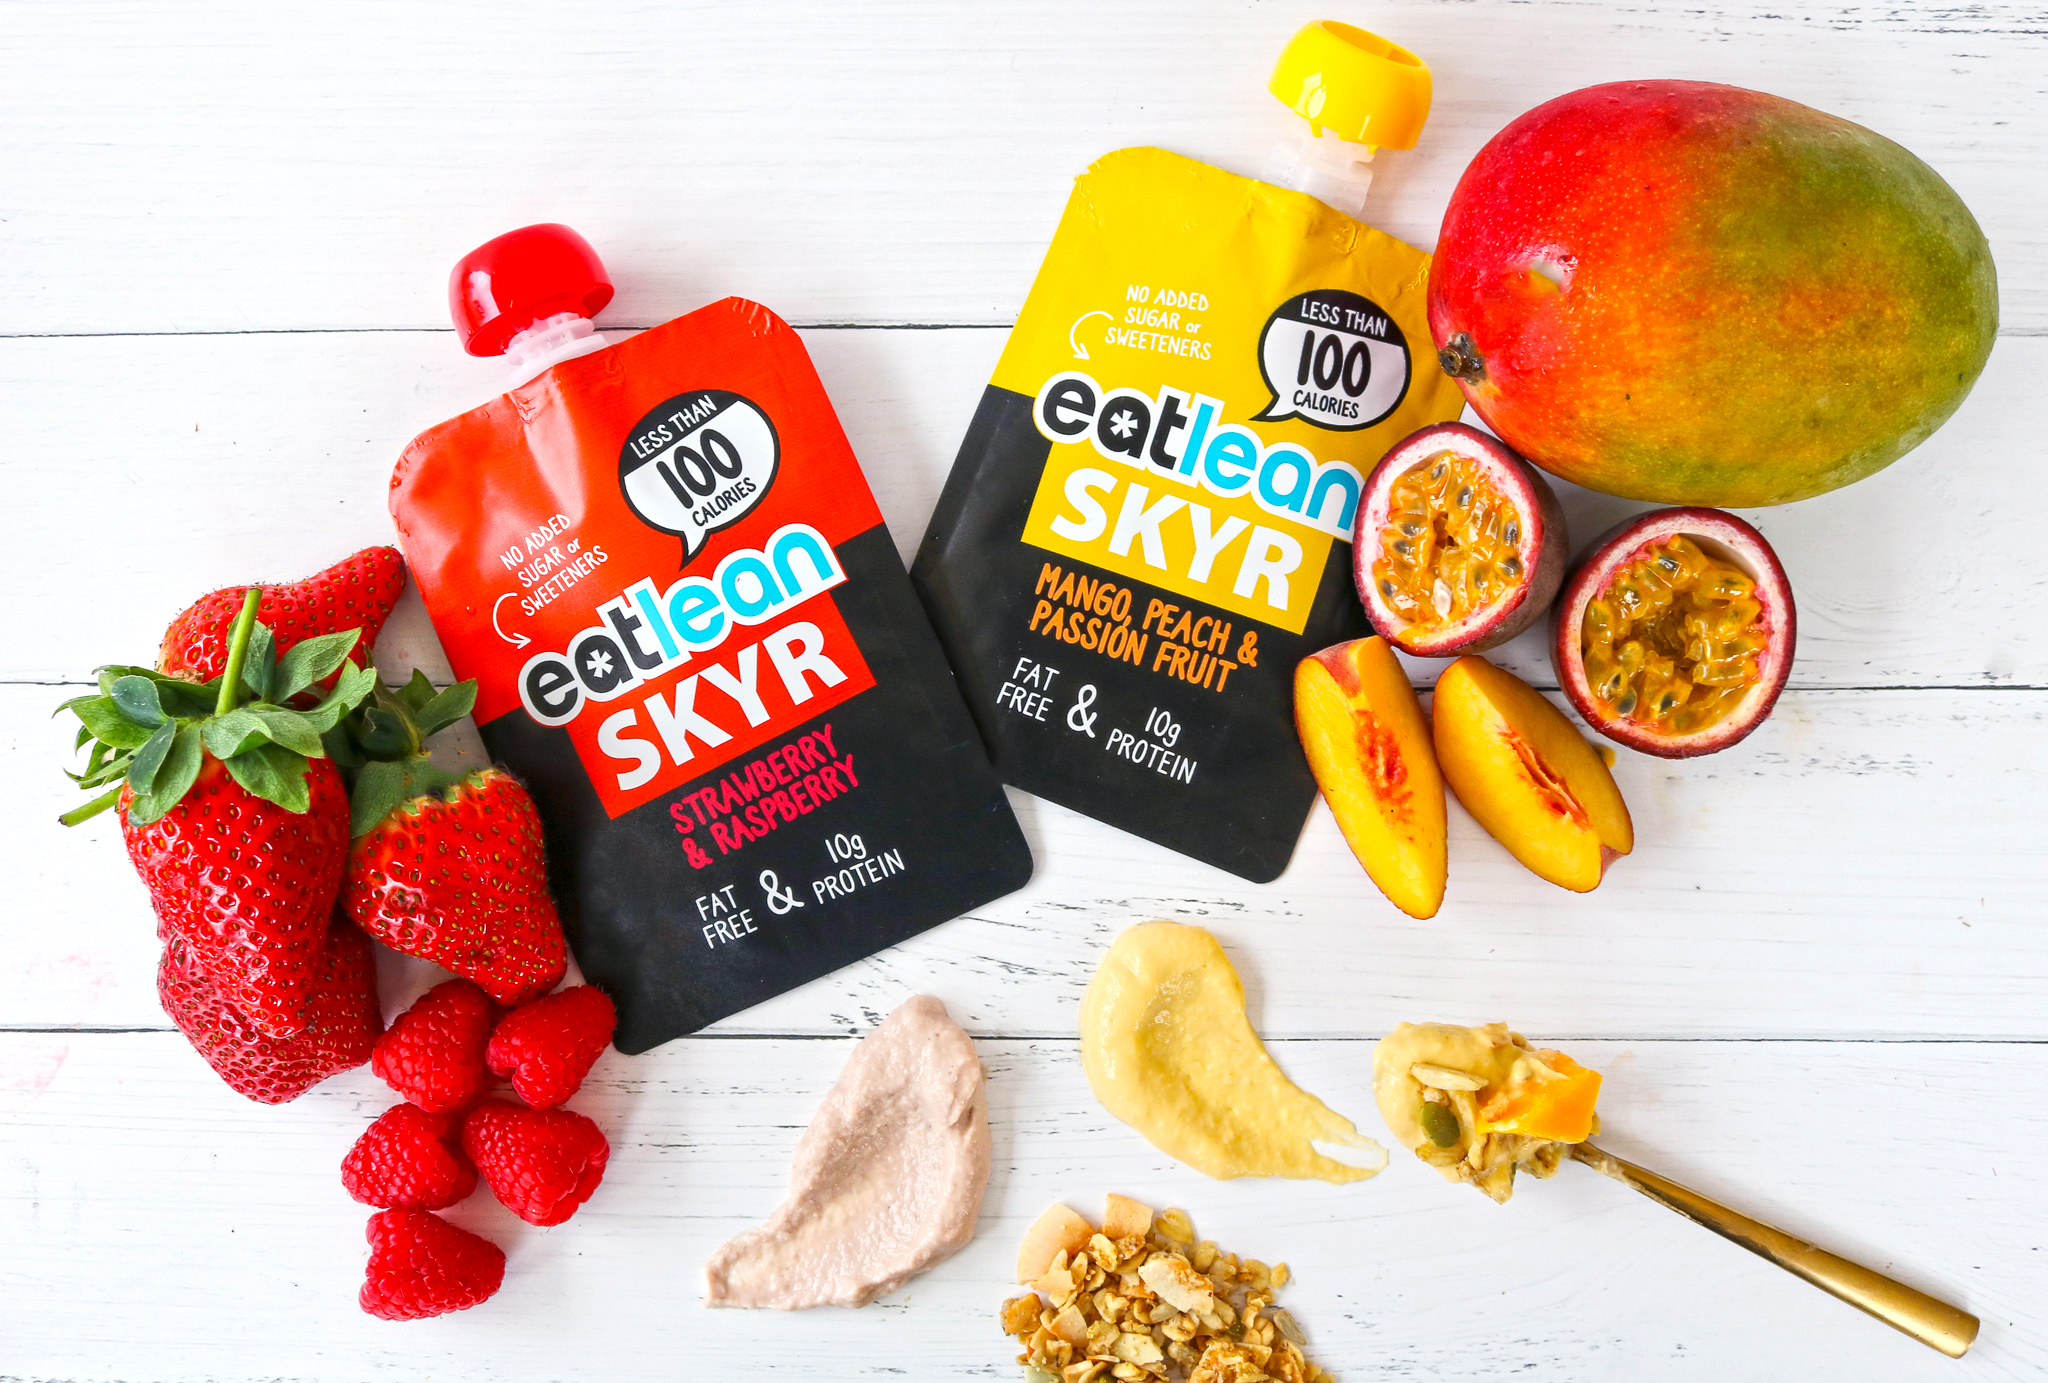 Snack on-the-go with Eatlean’s new Skyr Pouches